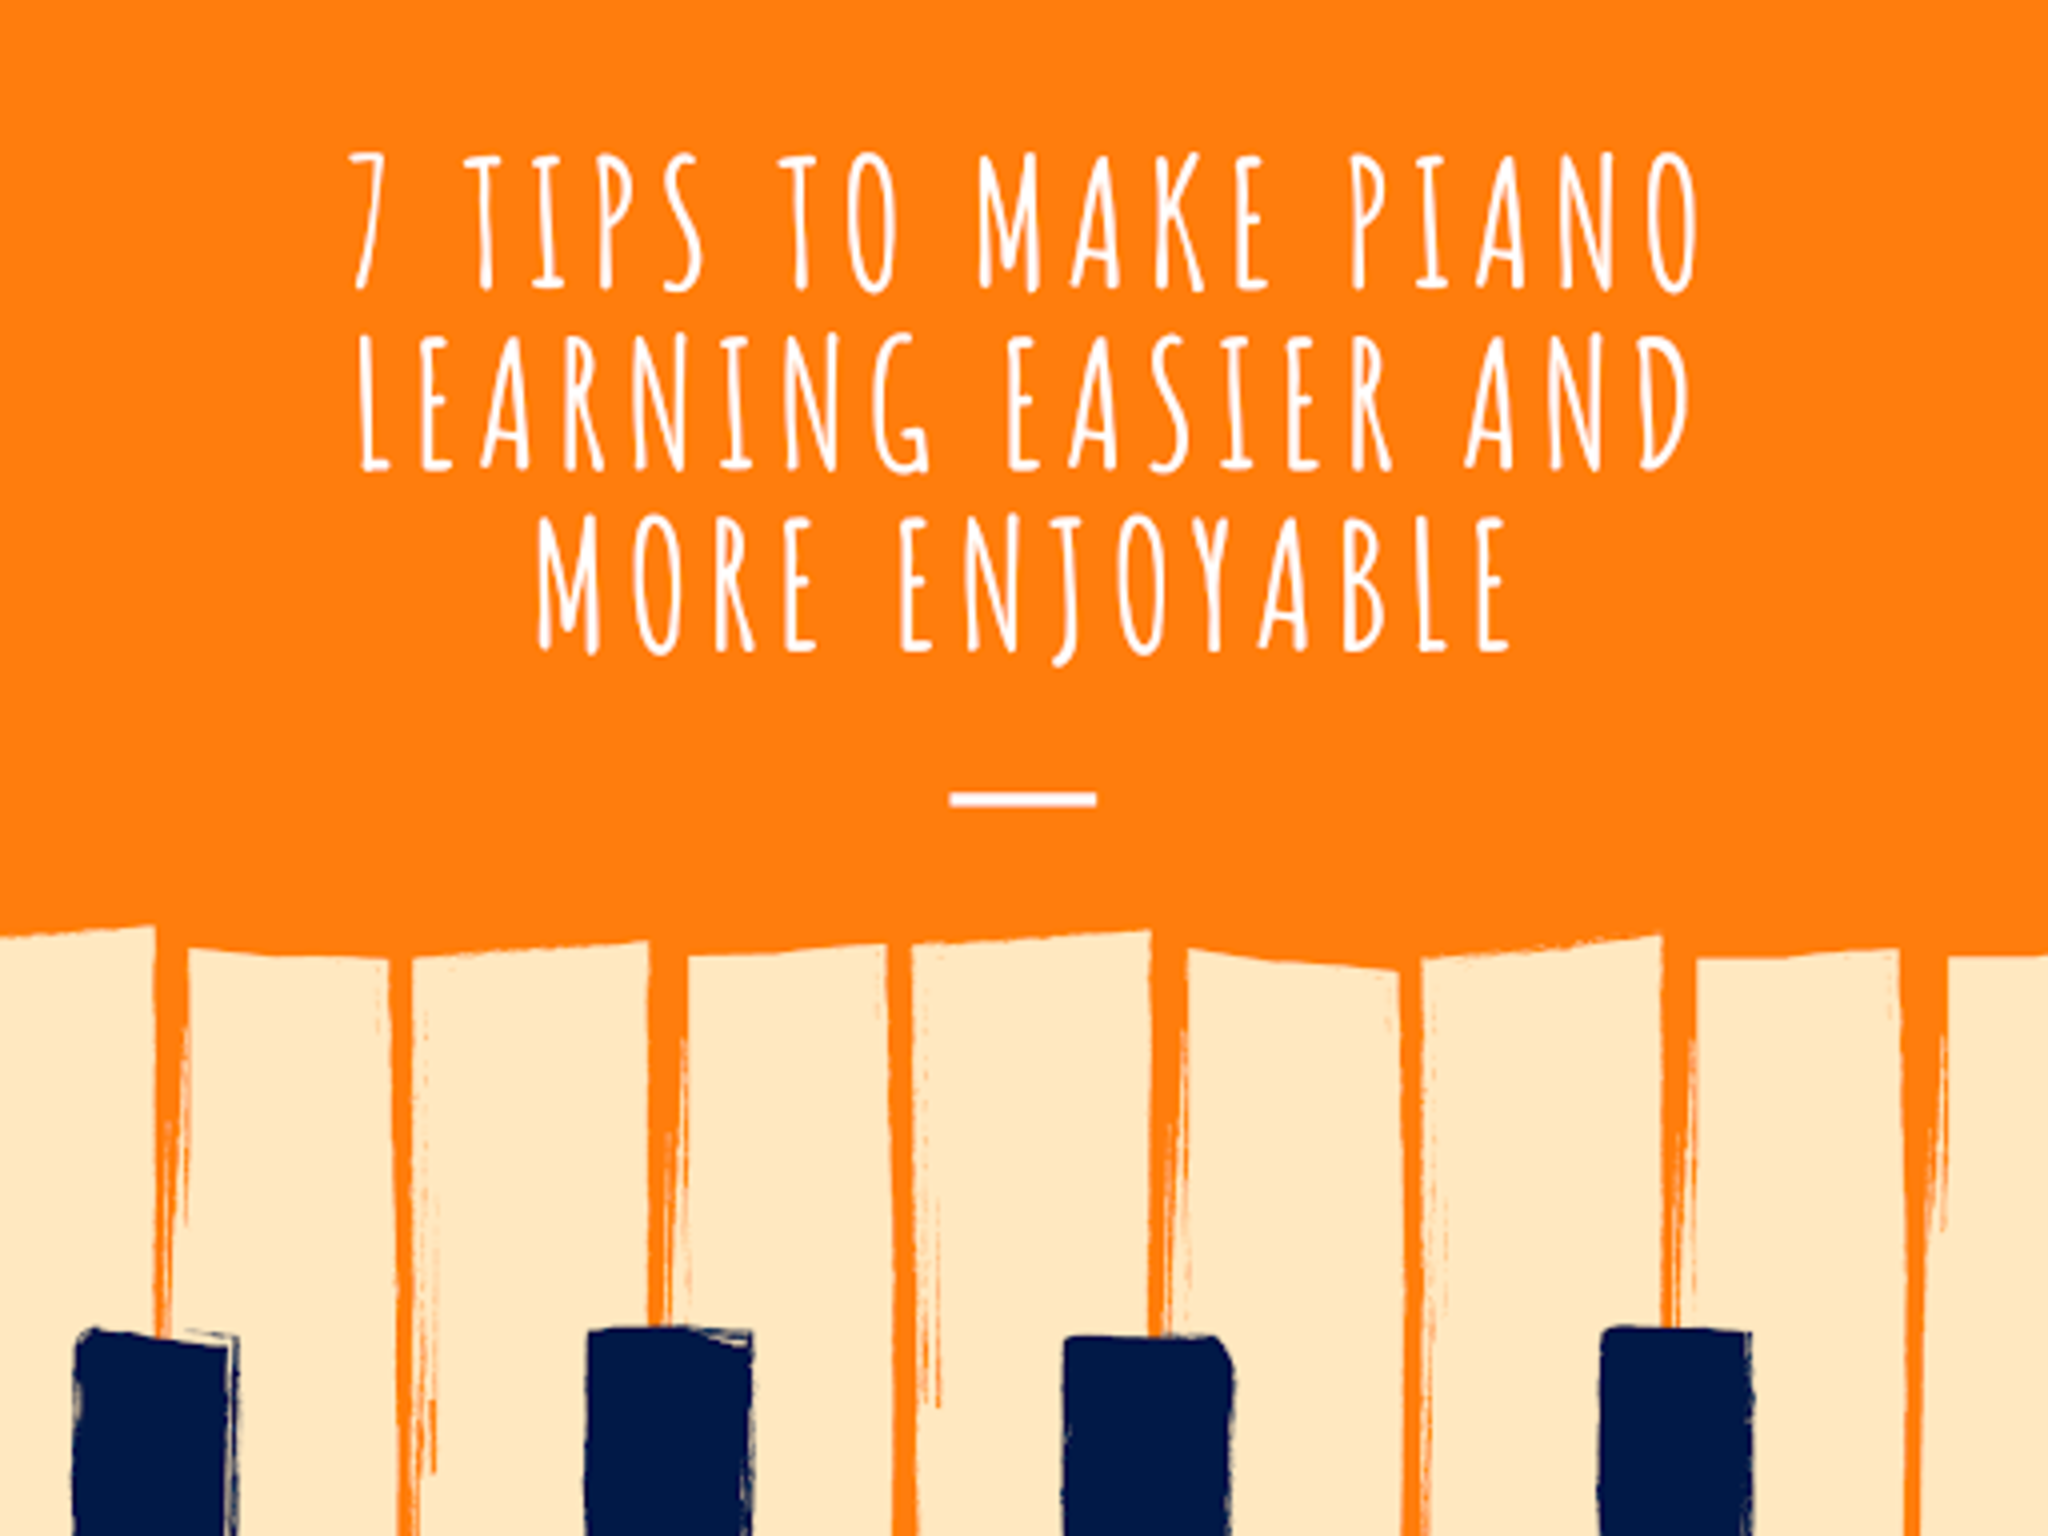 7 Tips To Make Piano Learning Easier And More Enjoyable